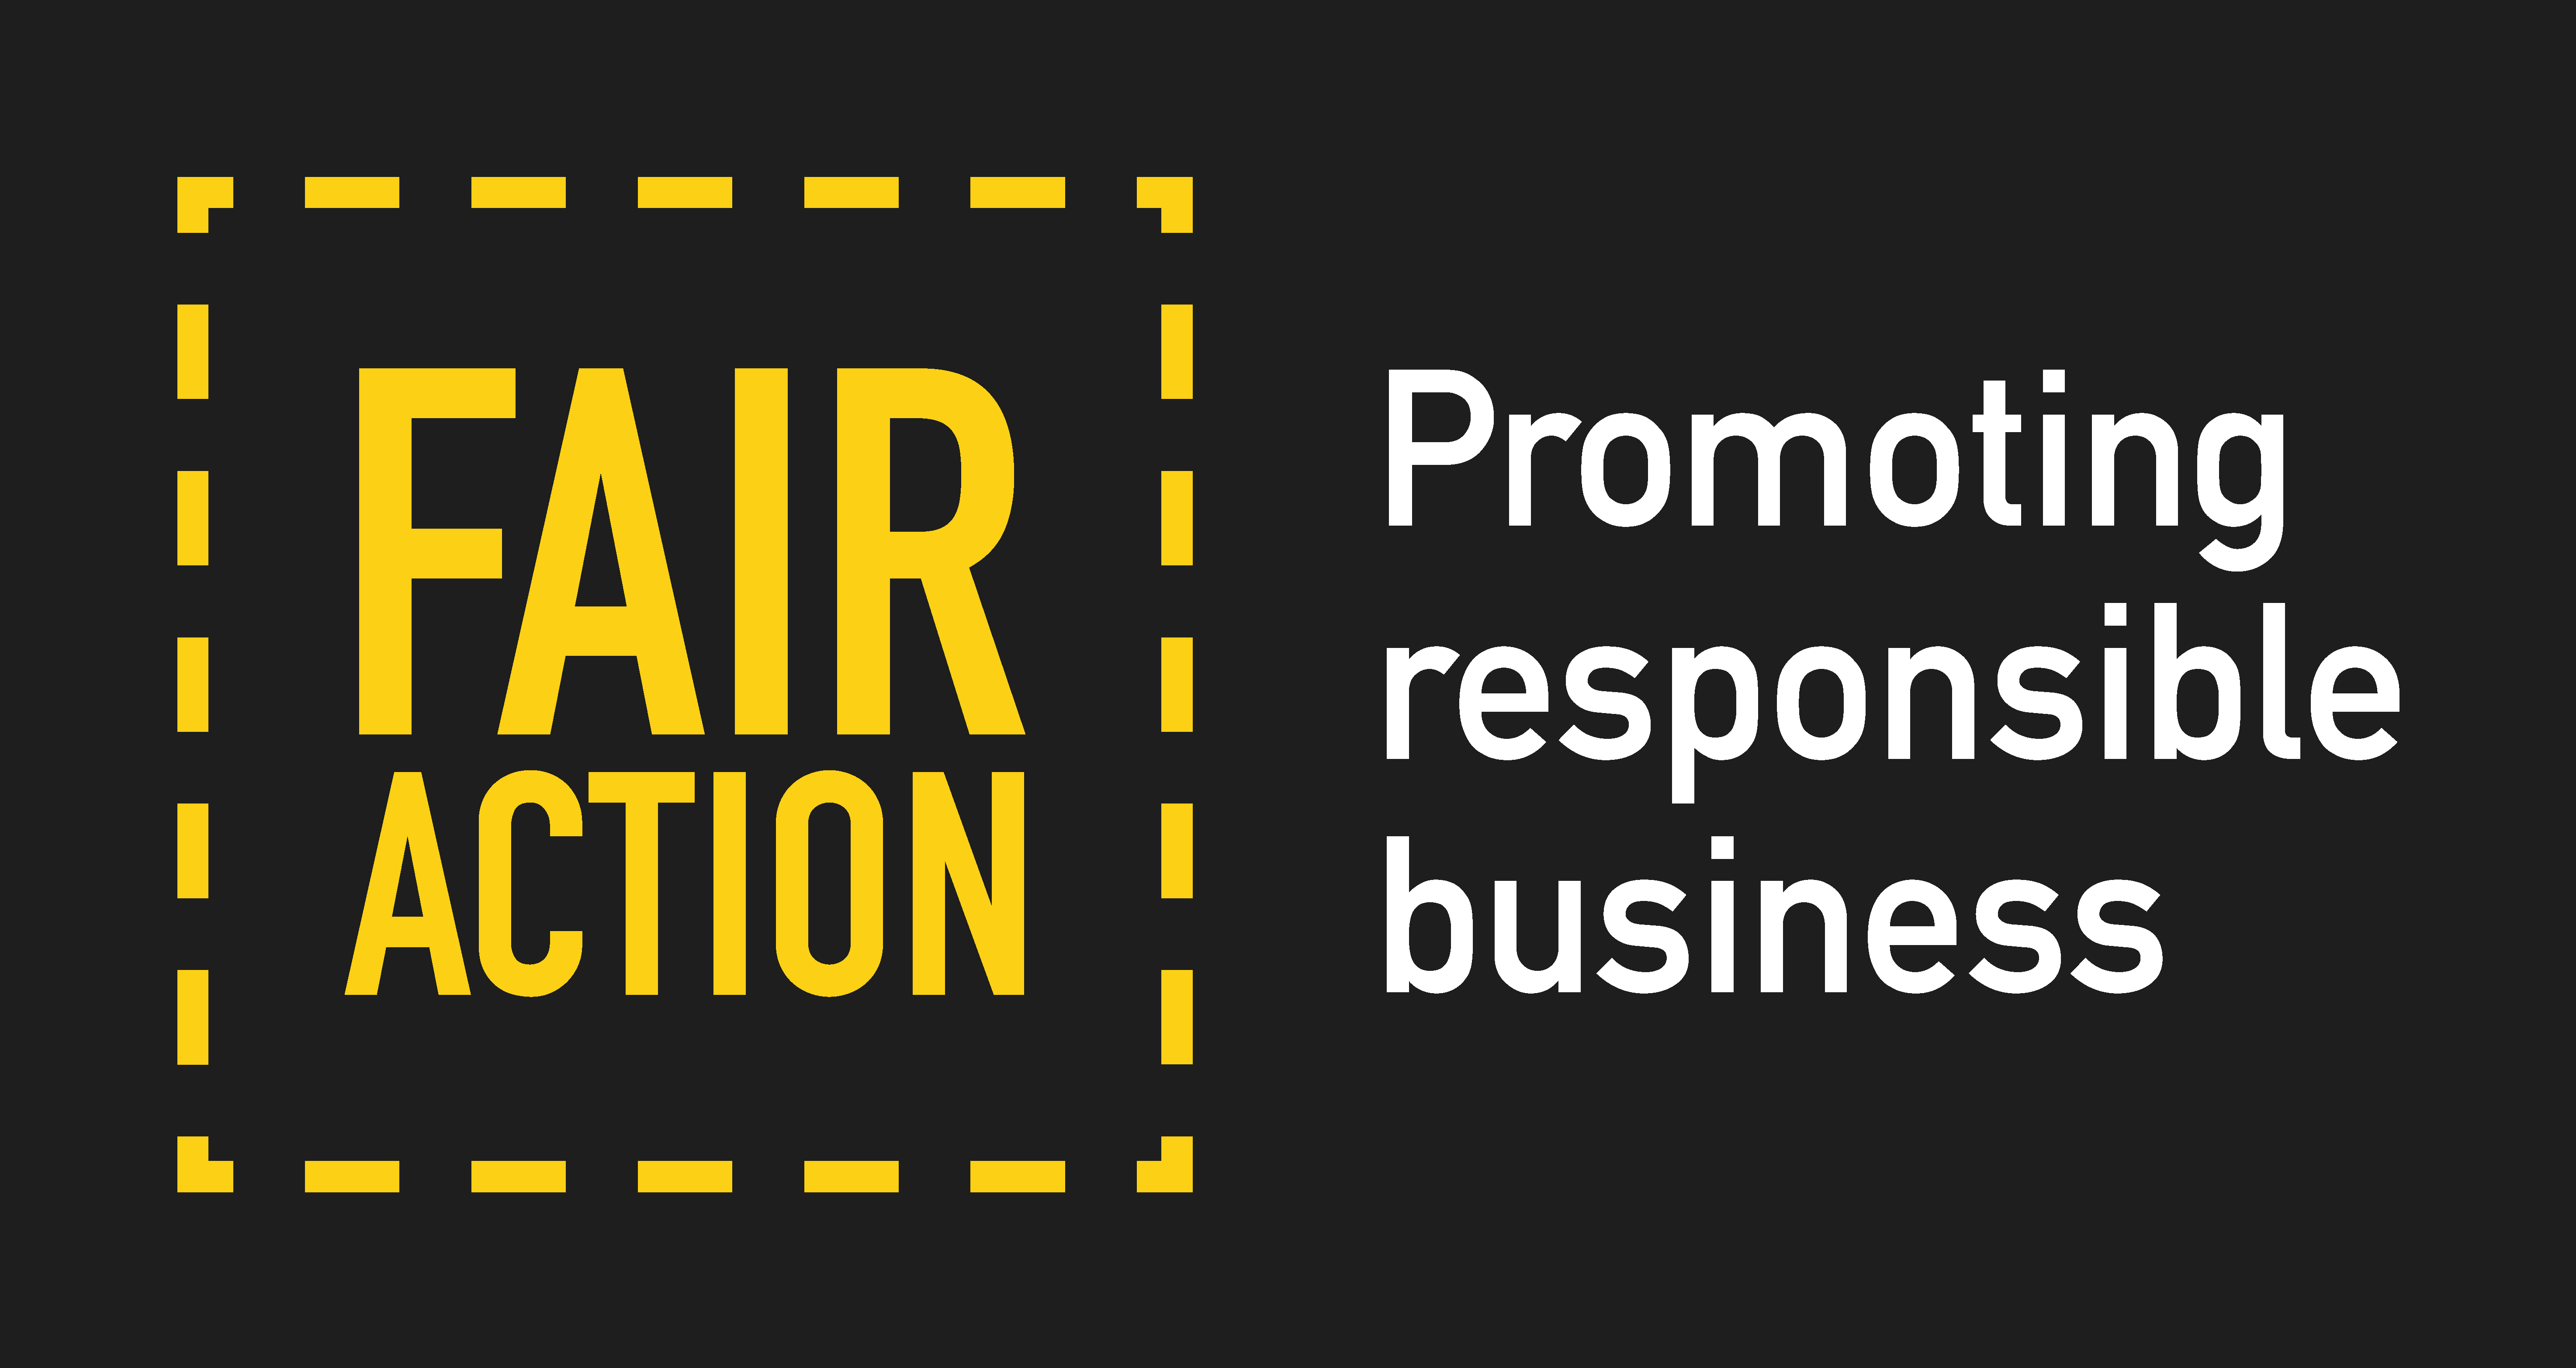 Fair Action - Promoting responsible business